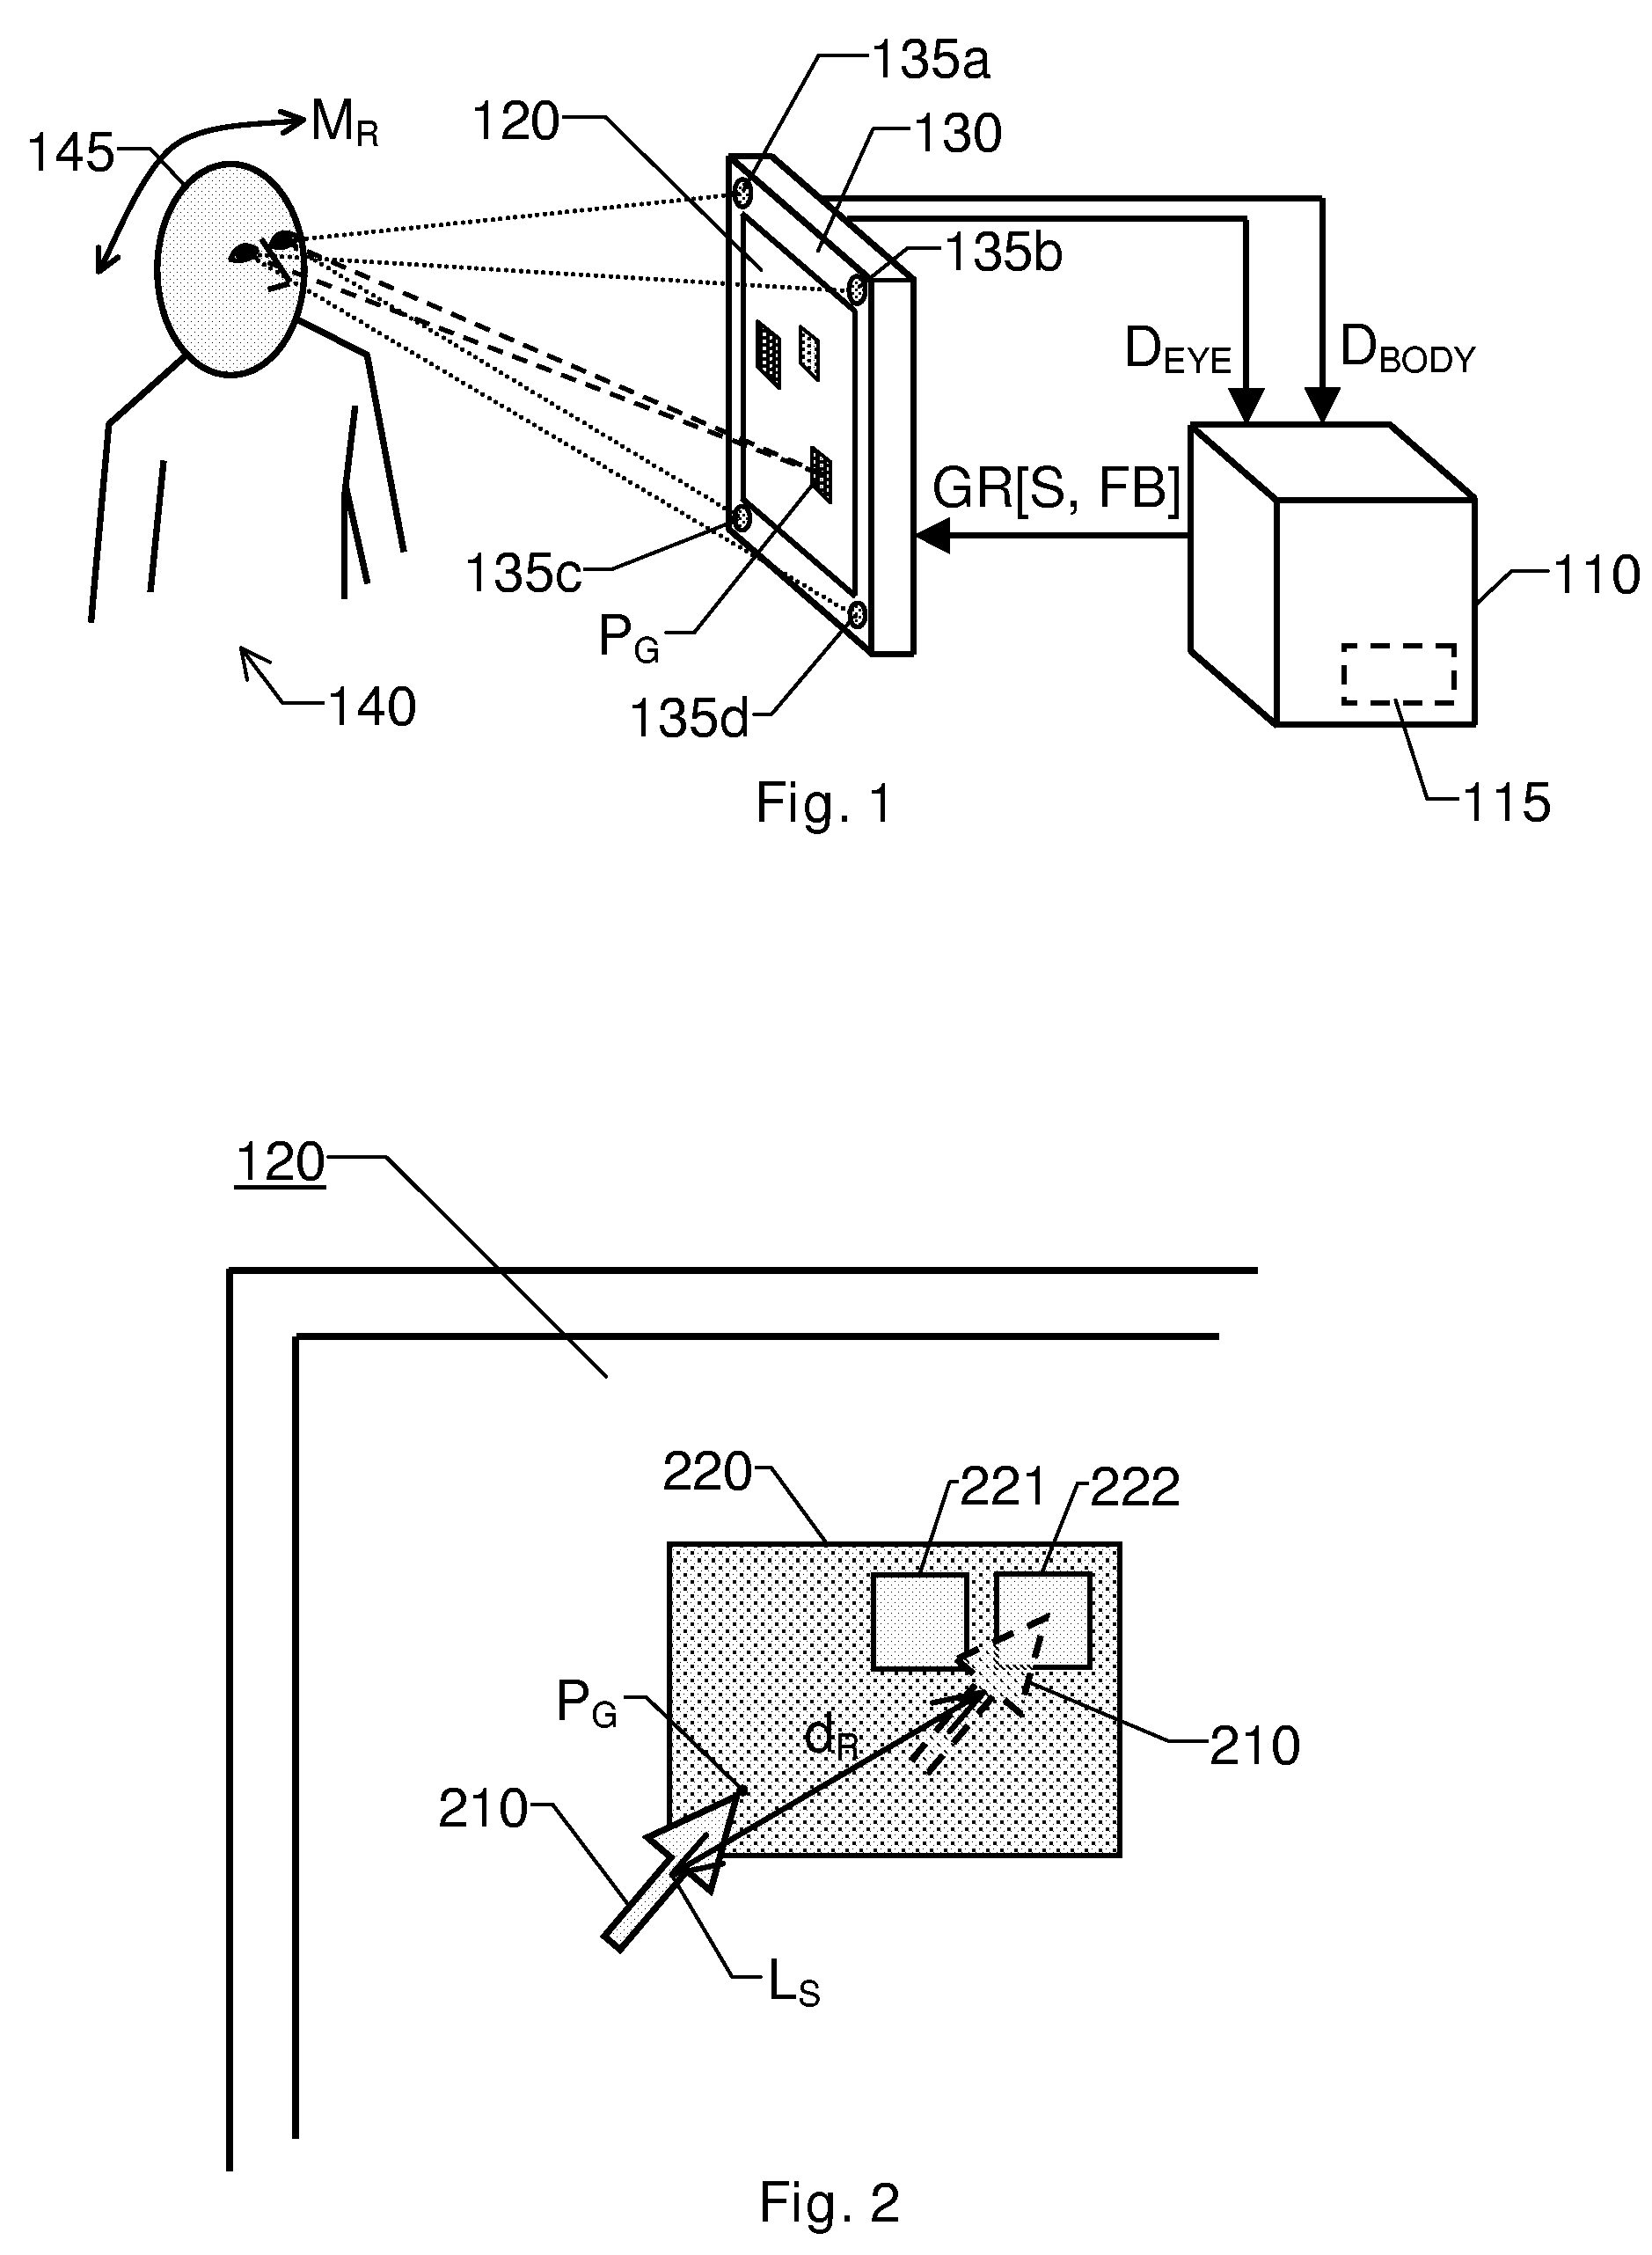 Generation of graphical feedback in a computer system